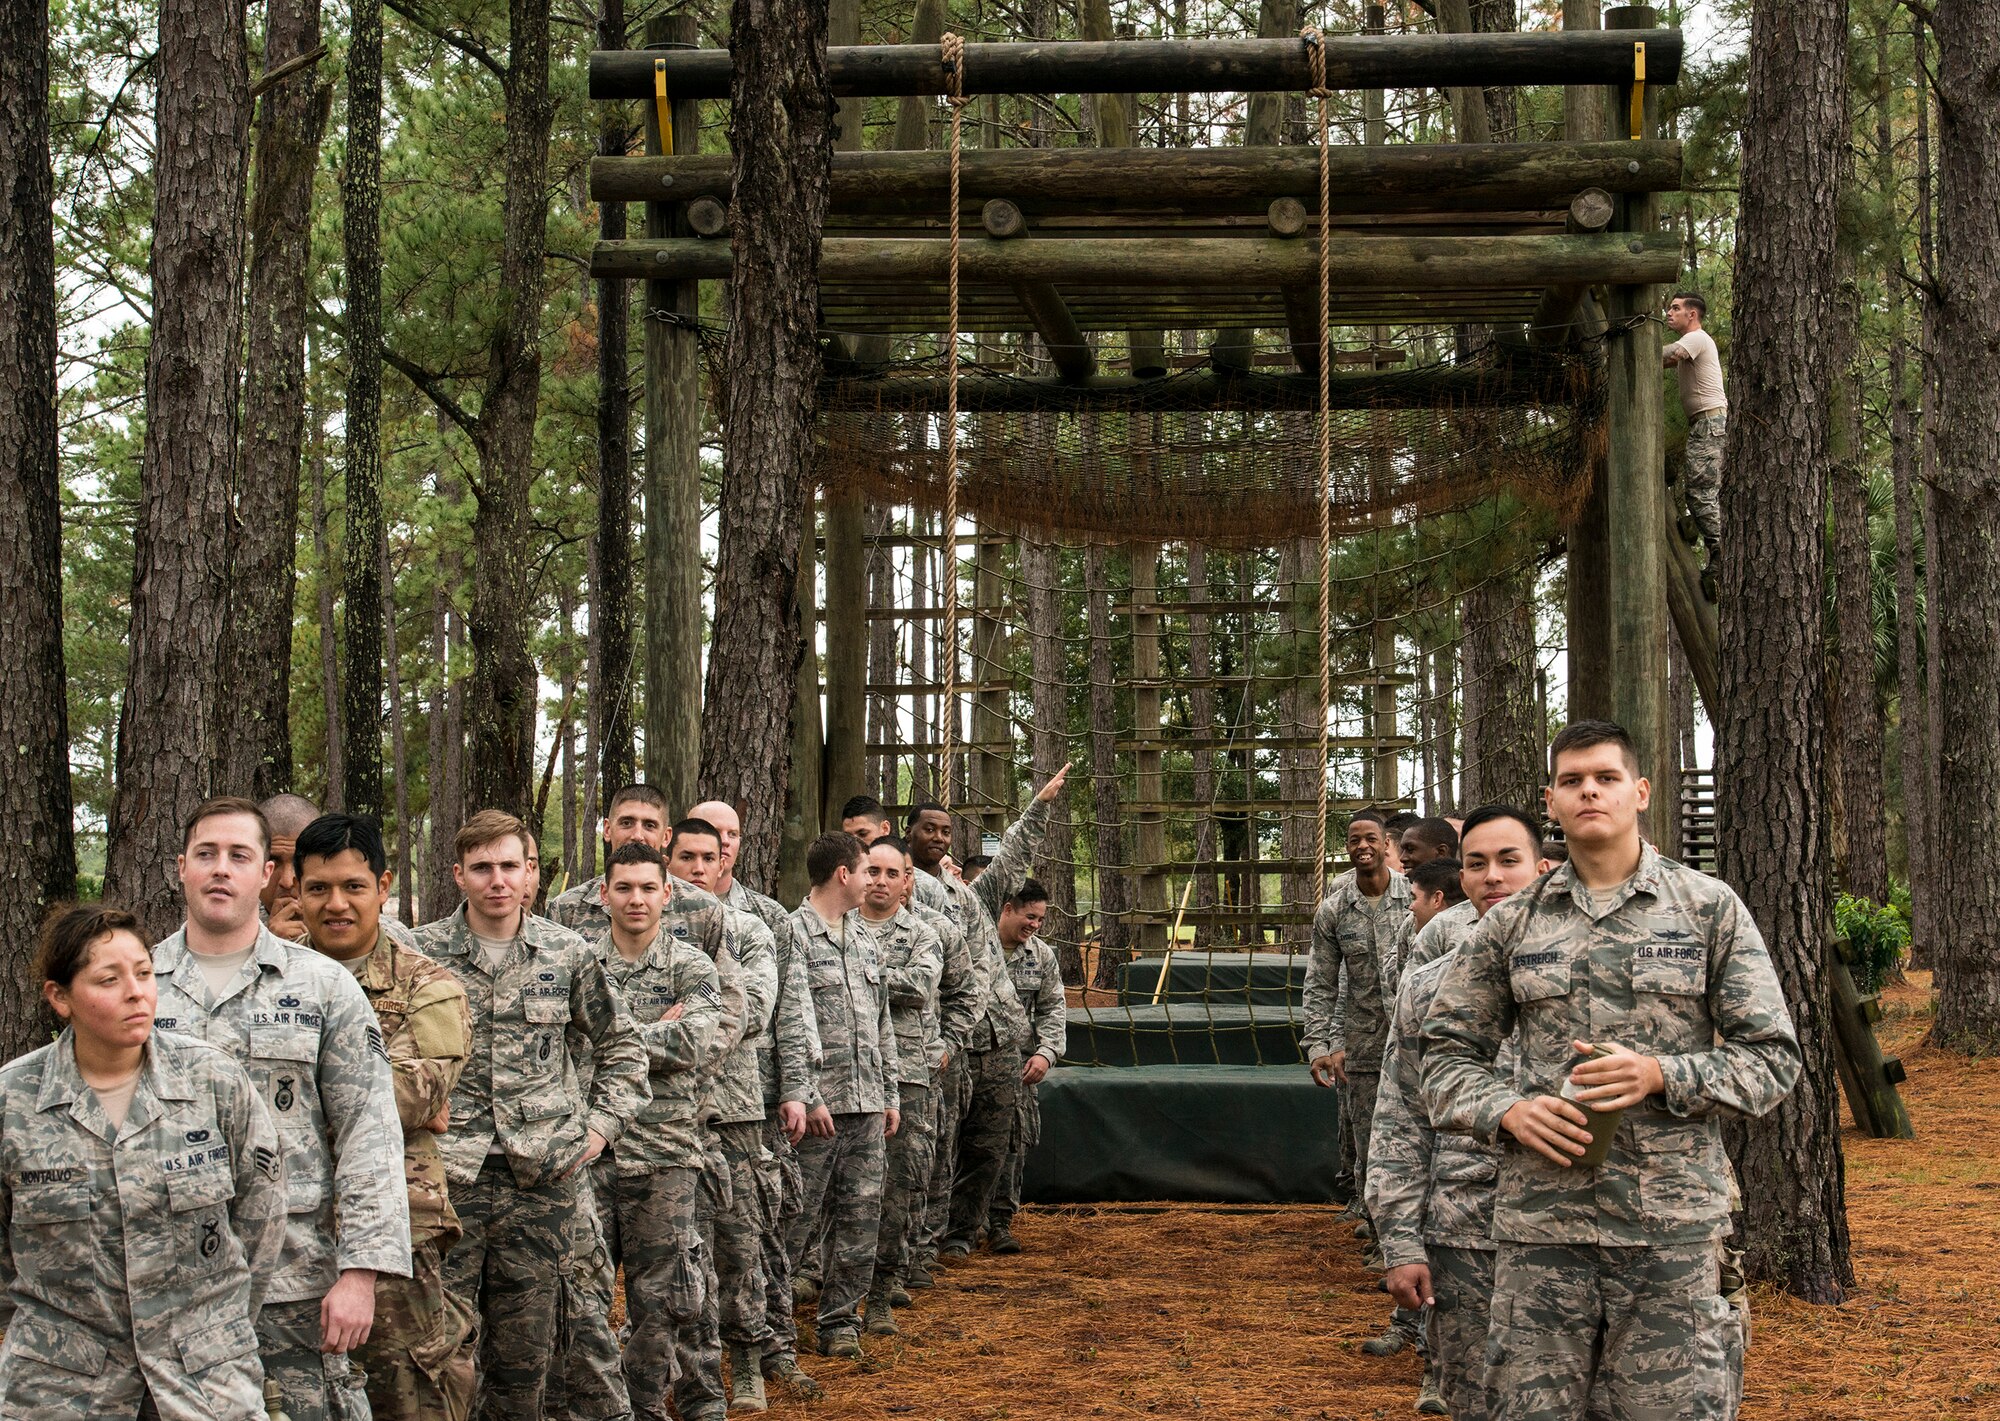 Airmen from the 820th Base Defense Group at Moody Air Force Base, Ga. and the 1st Special Operations Security Forces Squadron at Hurlburt Field, Fla., line up to start an obstacle course, Dec. 15, 2015, at Camp Blanding, Fla. The obstacle course consisted of nine obstacles such as rope climbs, rope swings, towers and low crawls. (U.S. Air Force photo by Airman 1st Class Lauren M. Johnson/Released)